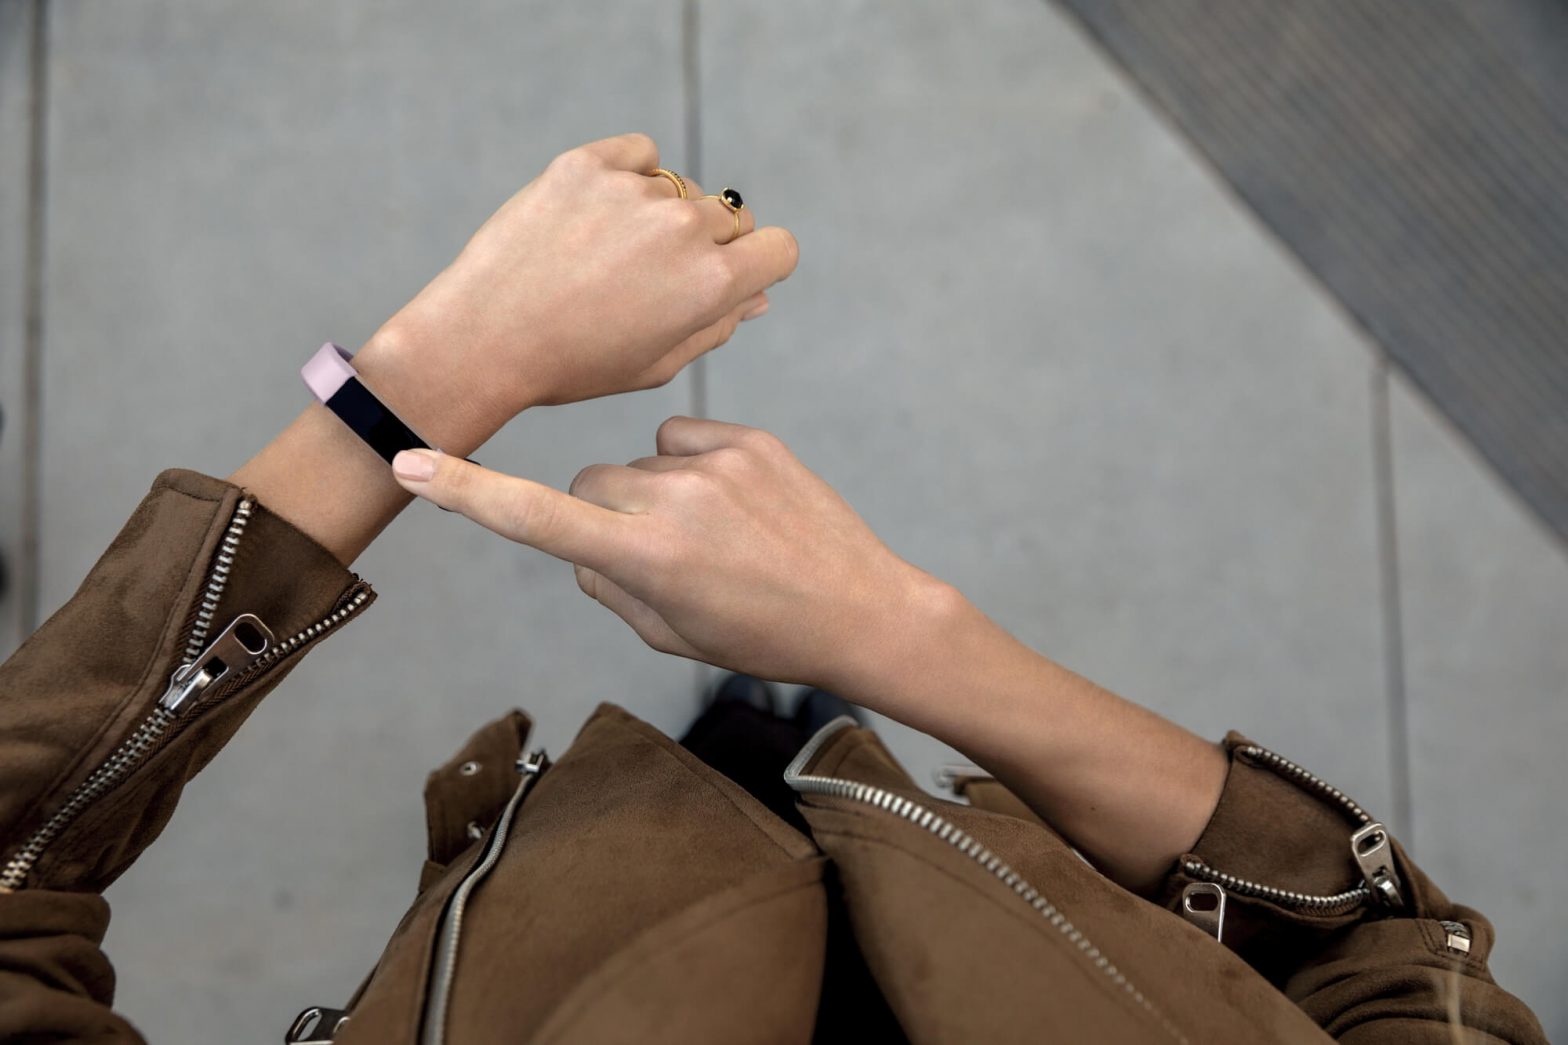 Fitbit Introduces Alta HR, world’s slimmest fitness wristband with continuous heart rate tracking